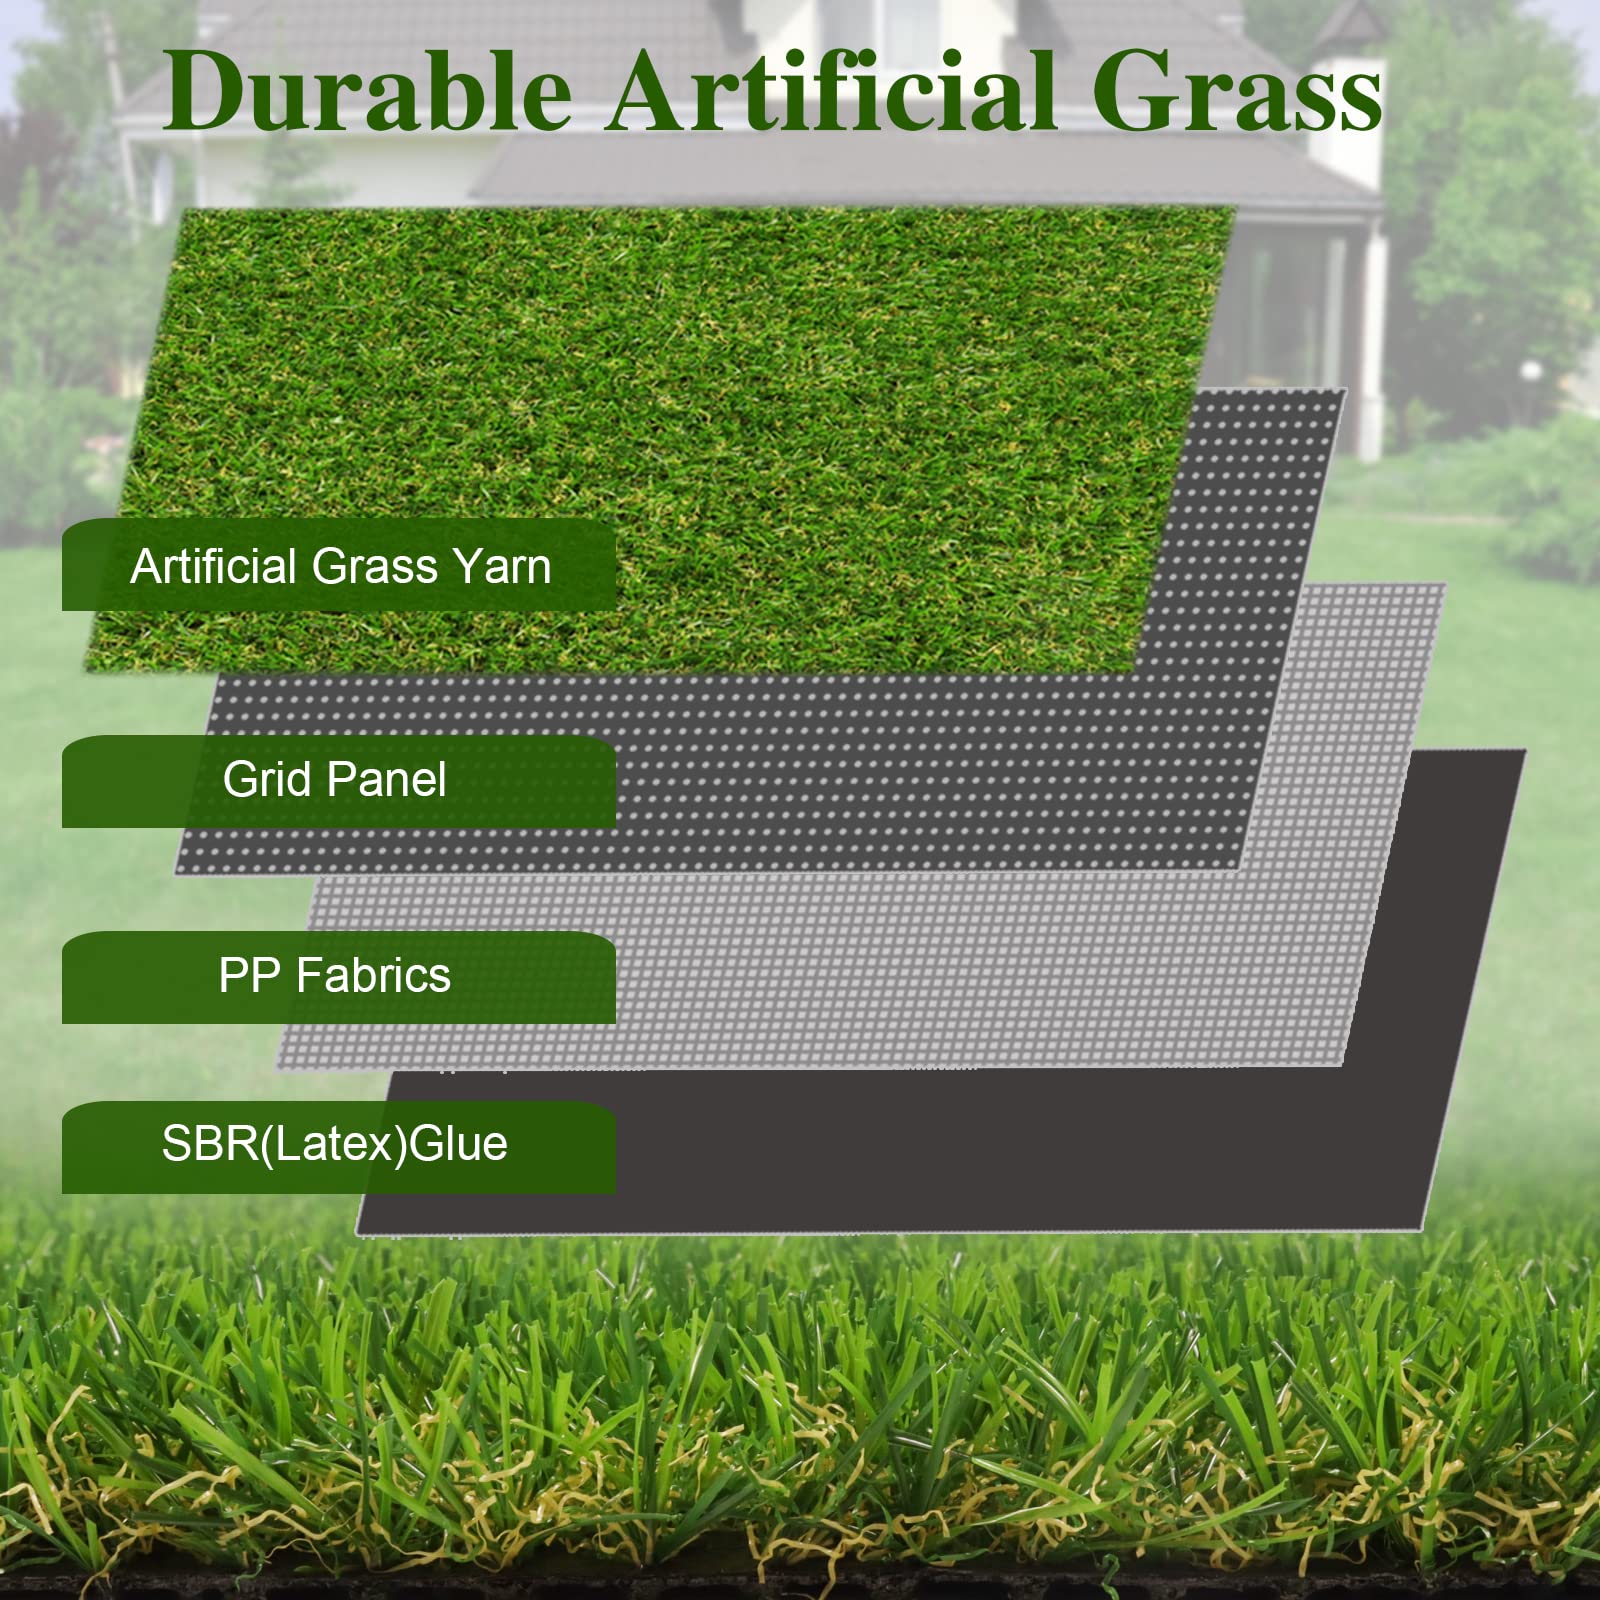 Weidear Artificial Turf Grass 4 ft x 6 ft, Realistic Fake Grass Rug with Drainage Holes, 20MM Indoor Outdoor Lawn Grass Landscape for Backyard Patio, Synthetic Grass Mat for Dogs Pets, Customized